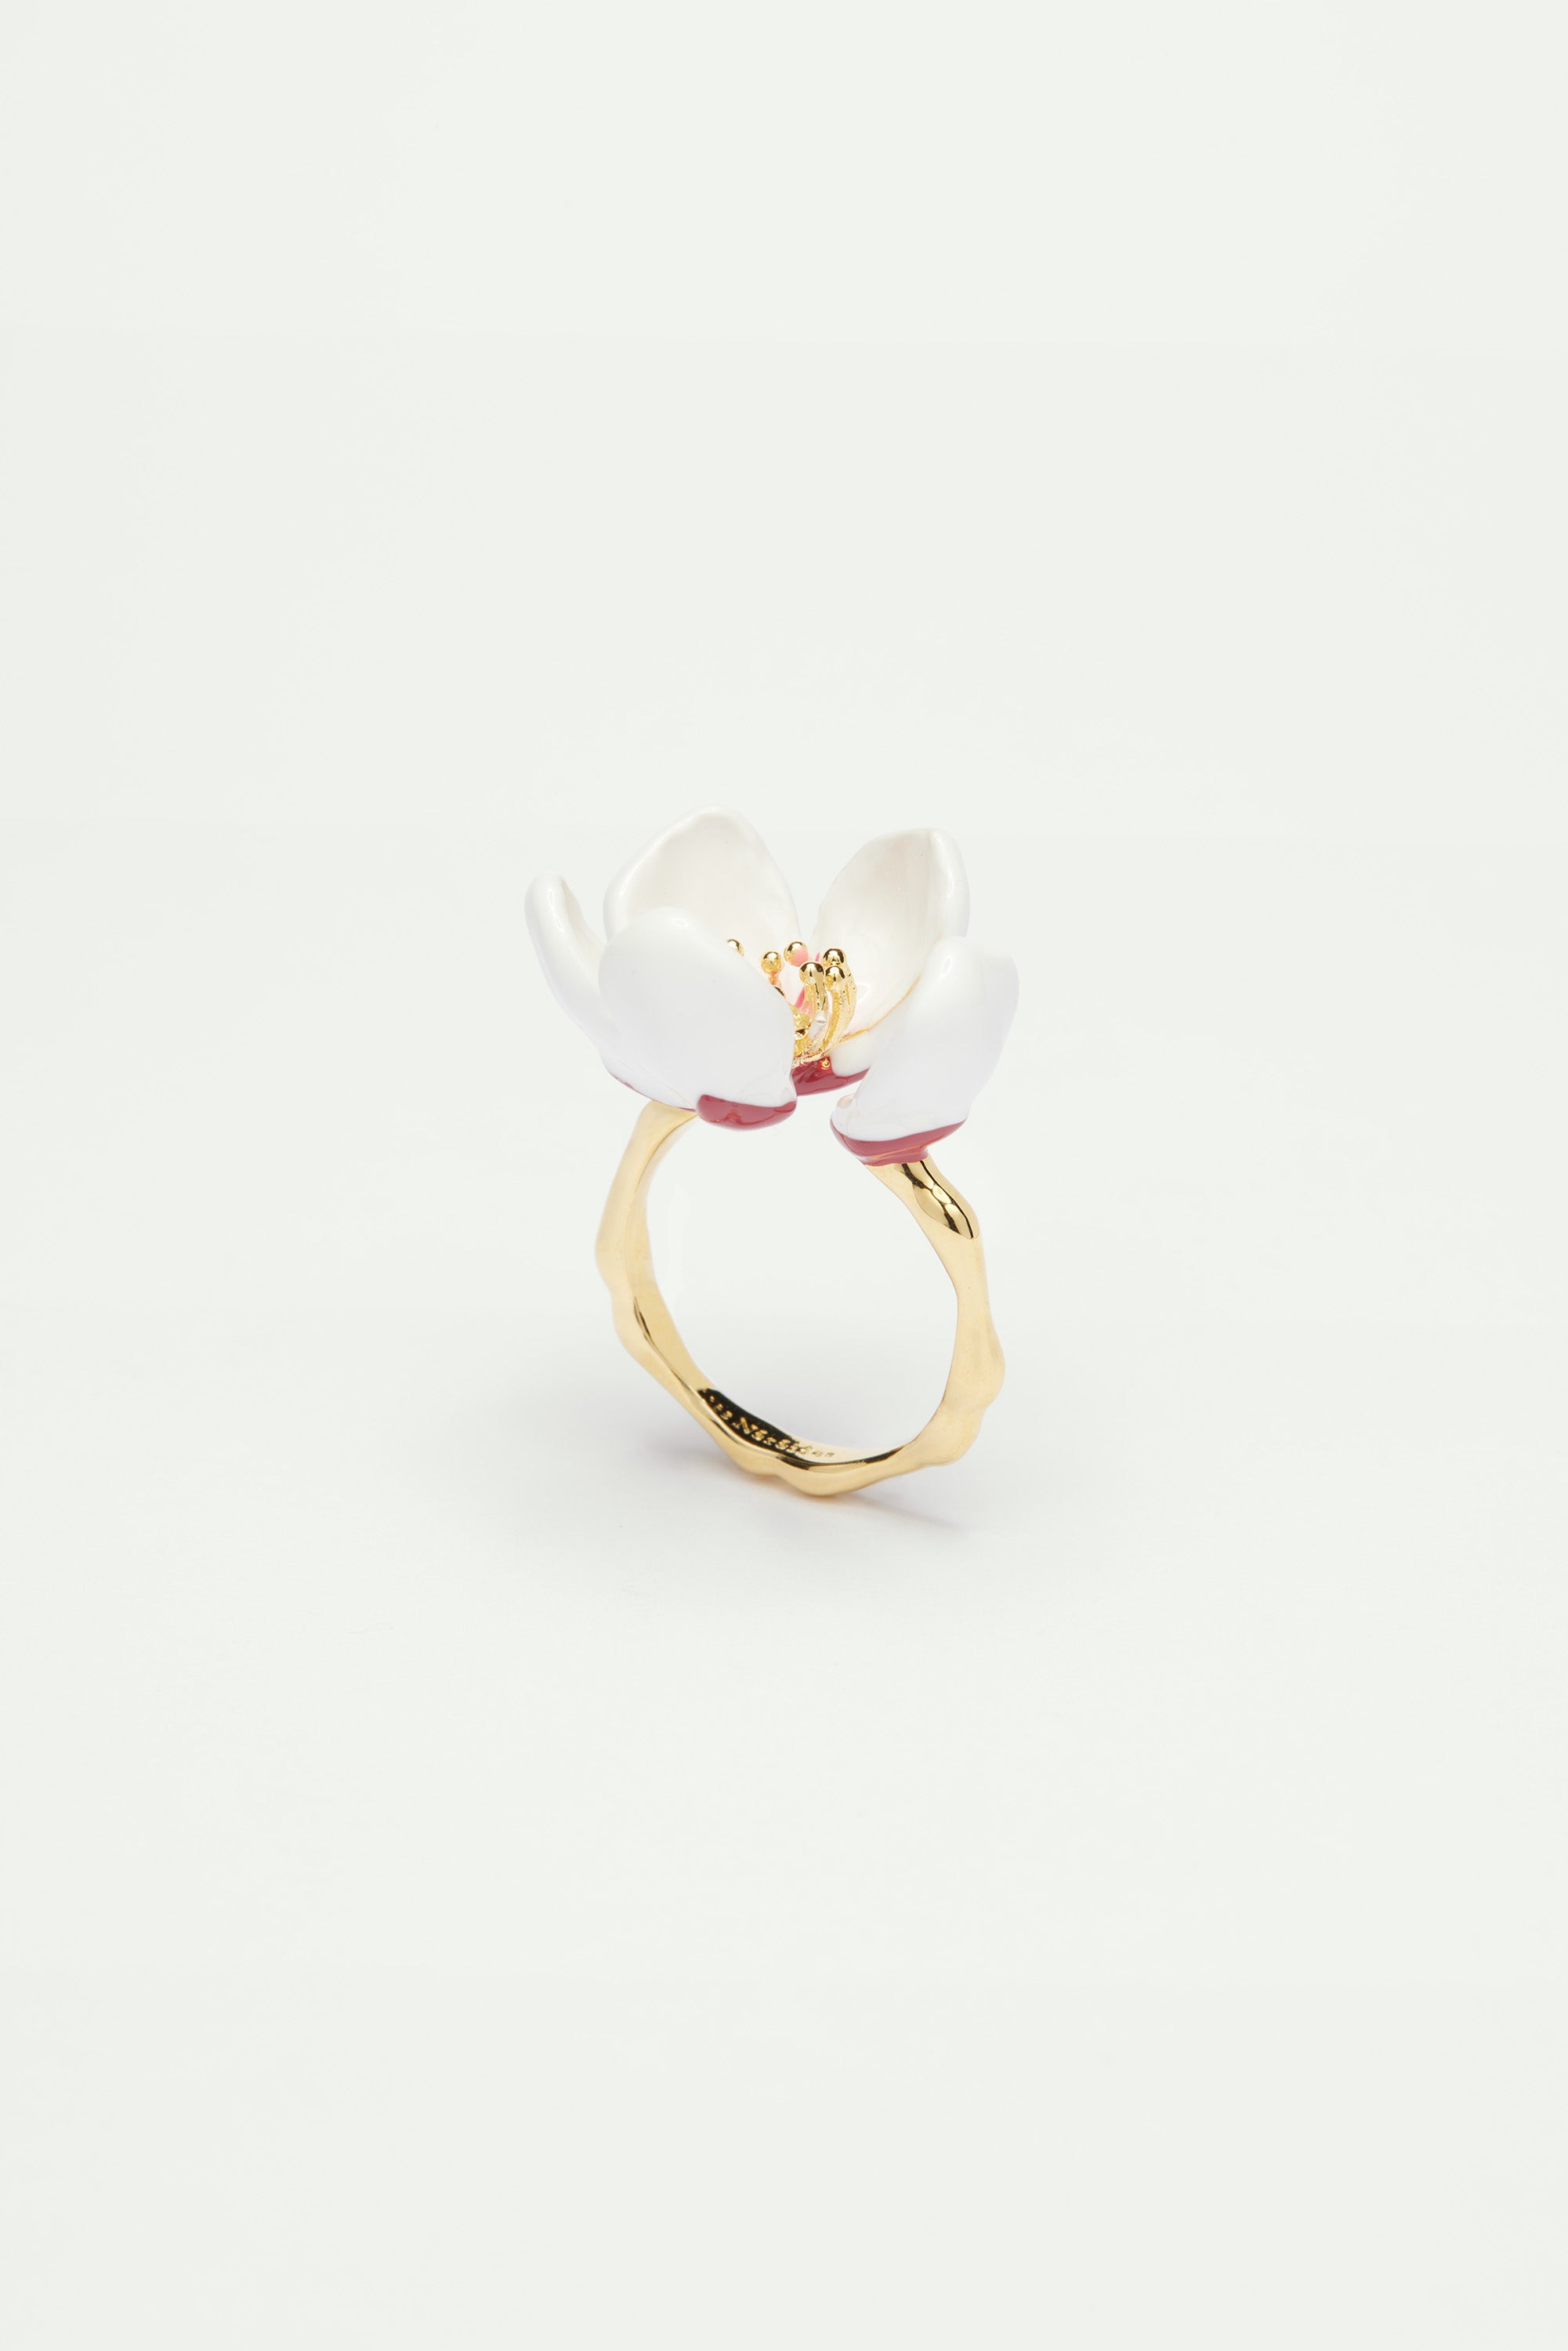 Japanese white cherry blossom and petals adjustable ring